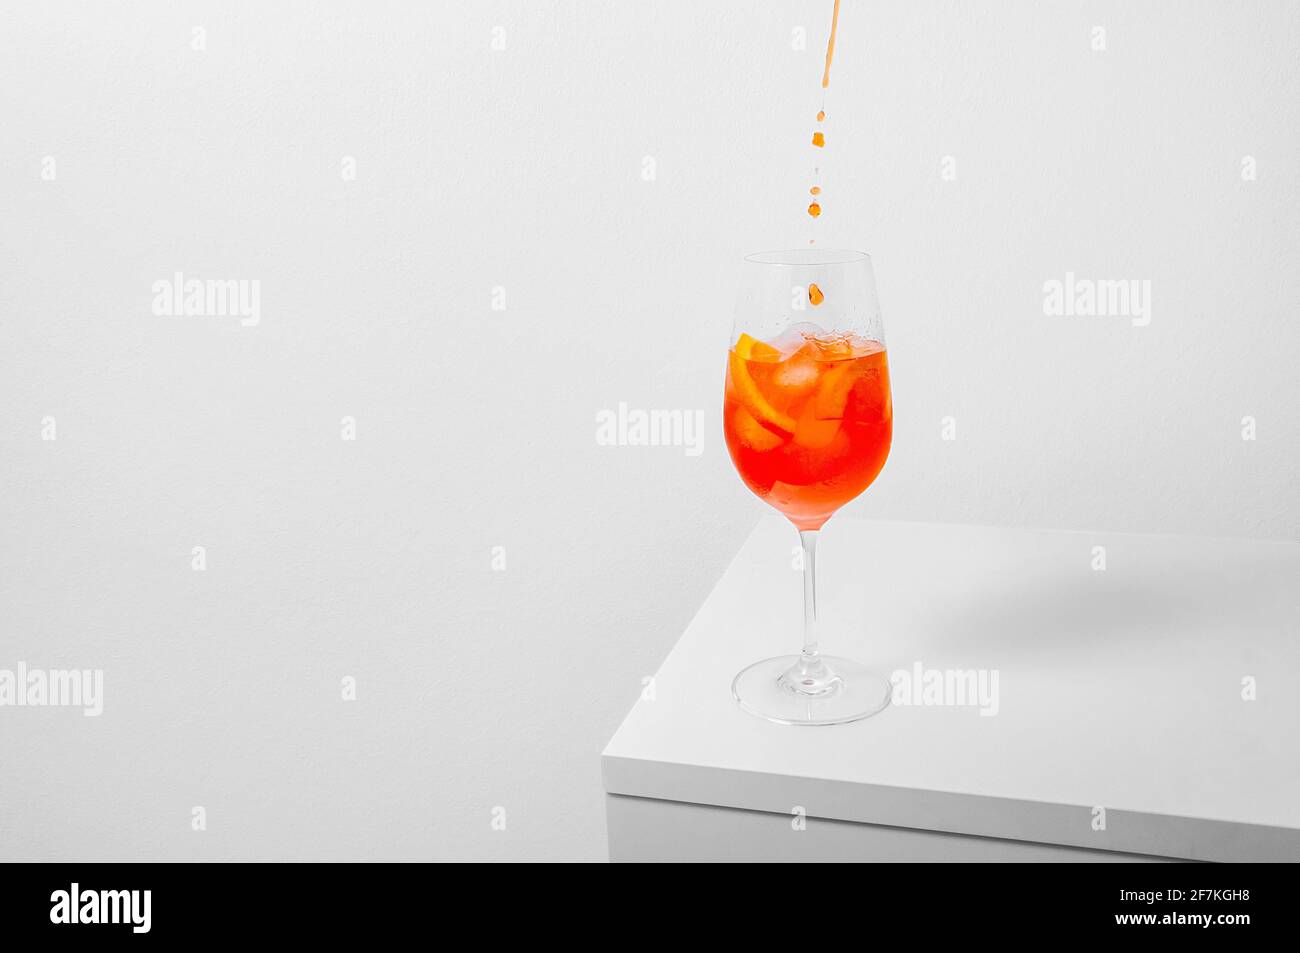 Aperol Spritz Cocktail. Pouring aperol in wine glass with ice on white background. Long fizzy drink. Minimal creative concept. Stock Photo